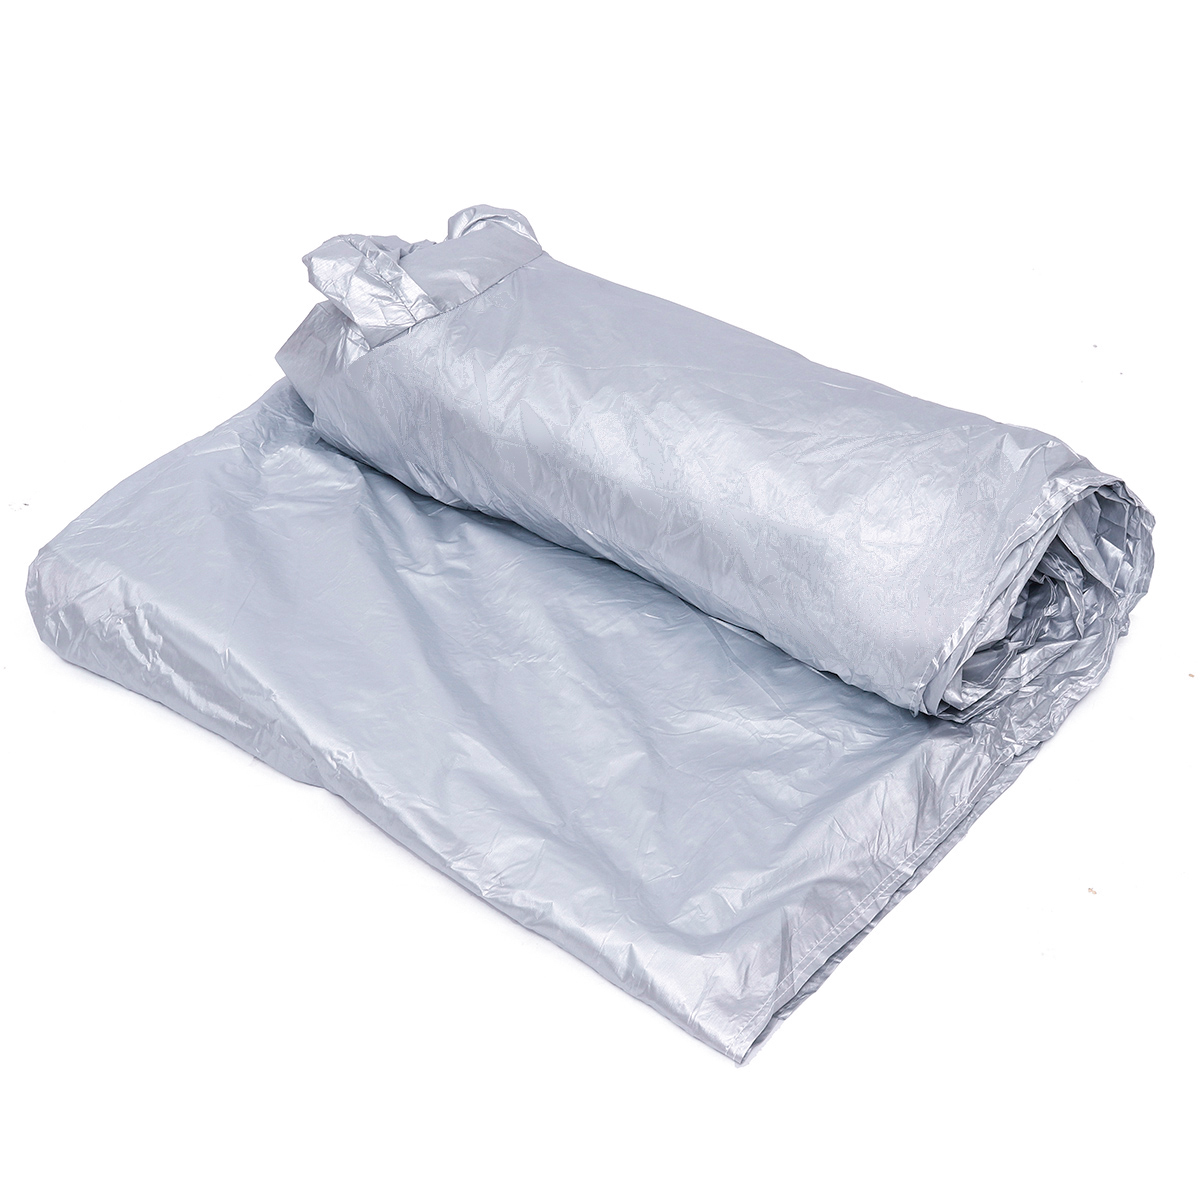 Outdoor Full Car Cover Waterproof Dust UV Snow Protection Extra Large Size